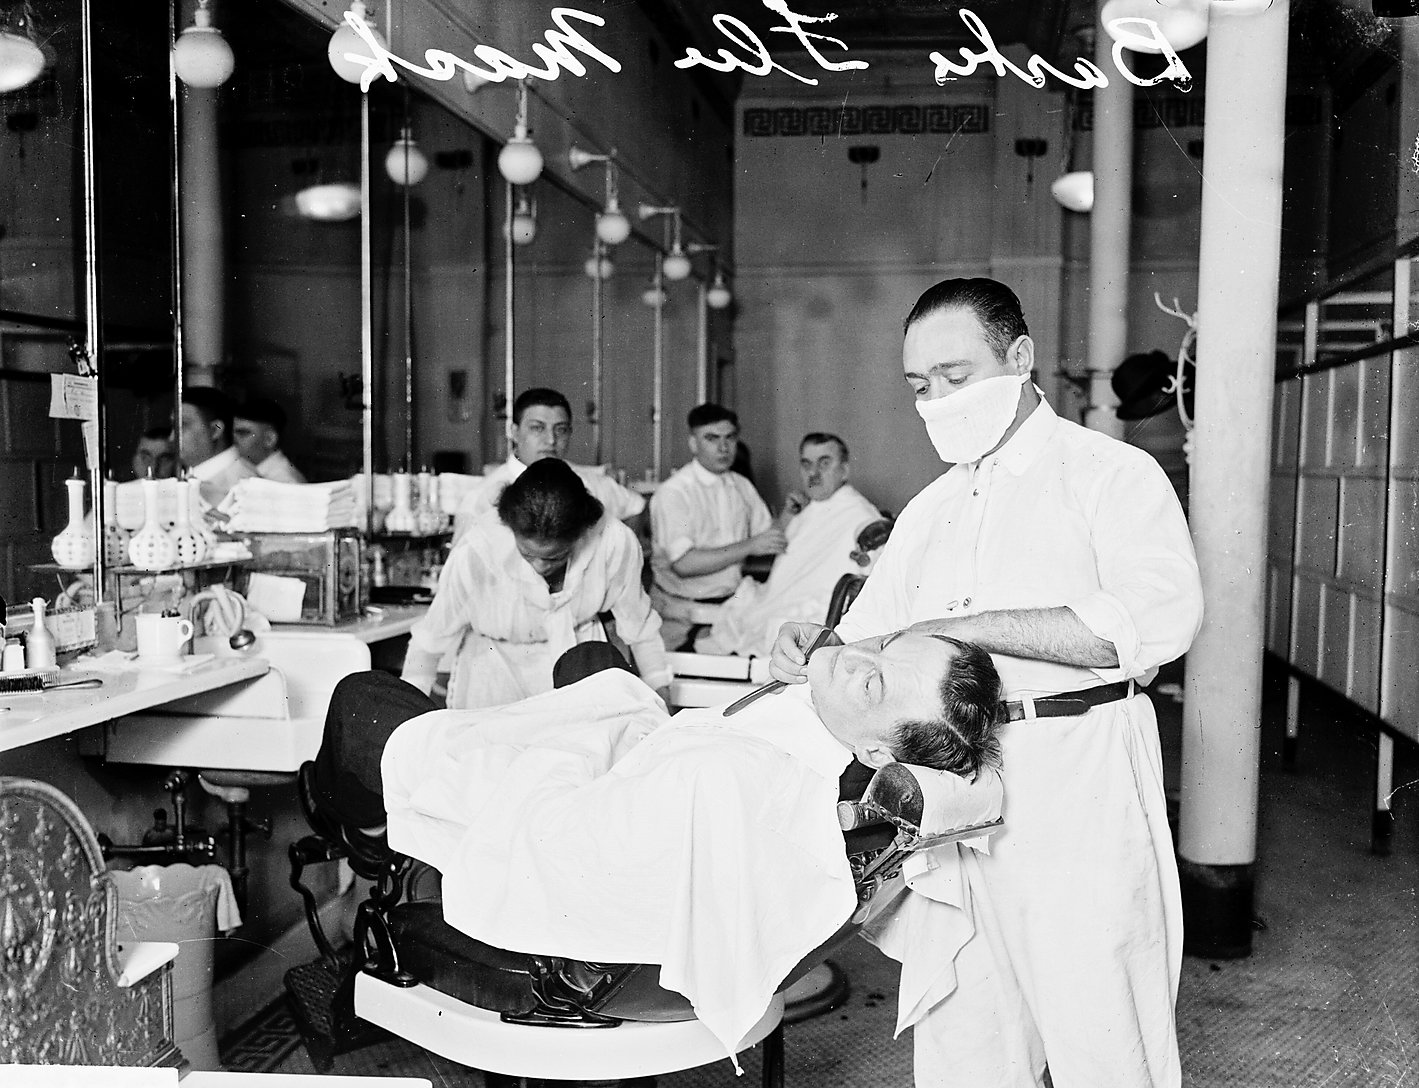 black and white image of a barbershop in 1918